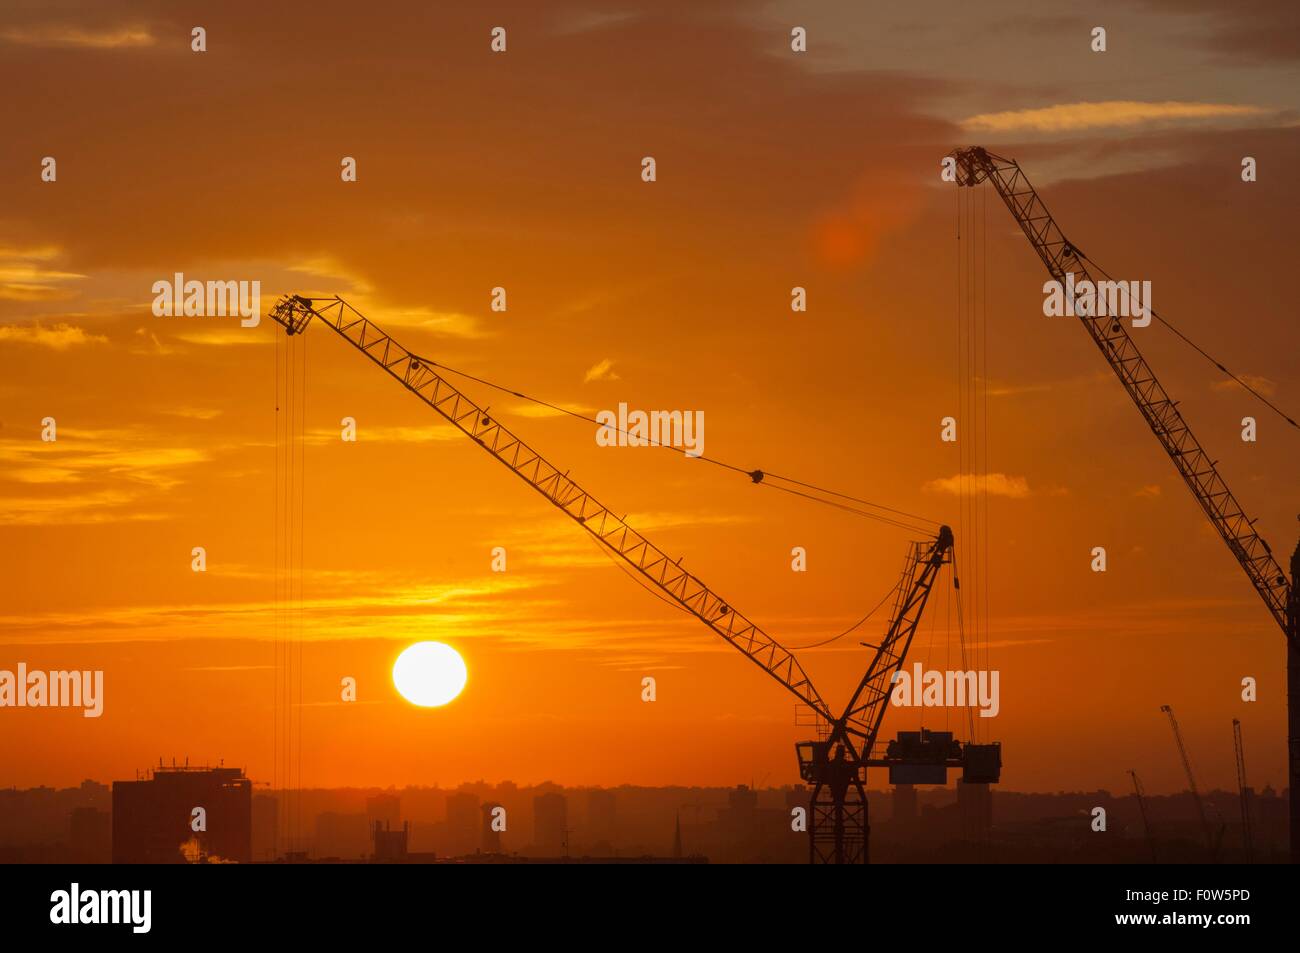 Silhouetted cranes and orange glowing sunset Stock Photo